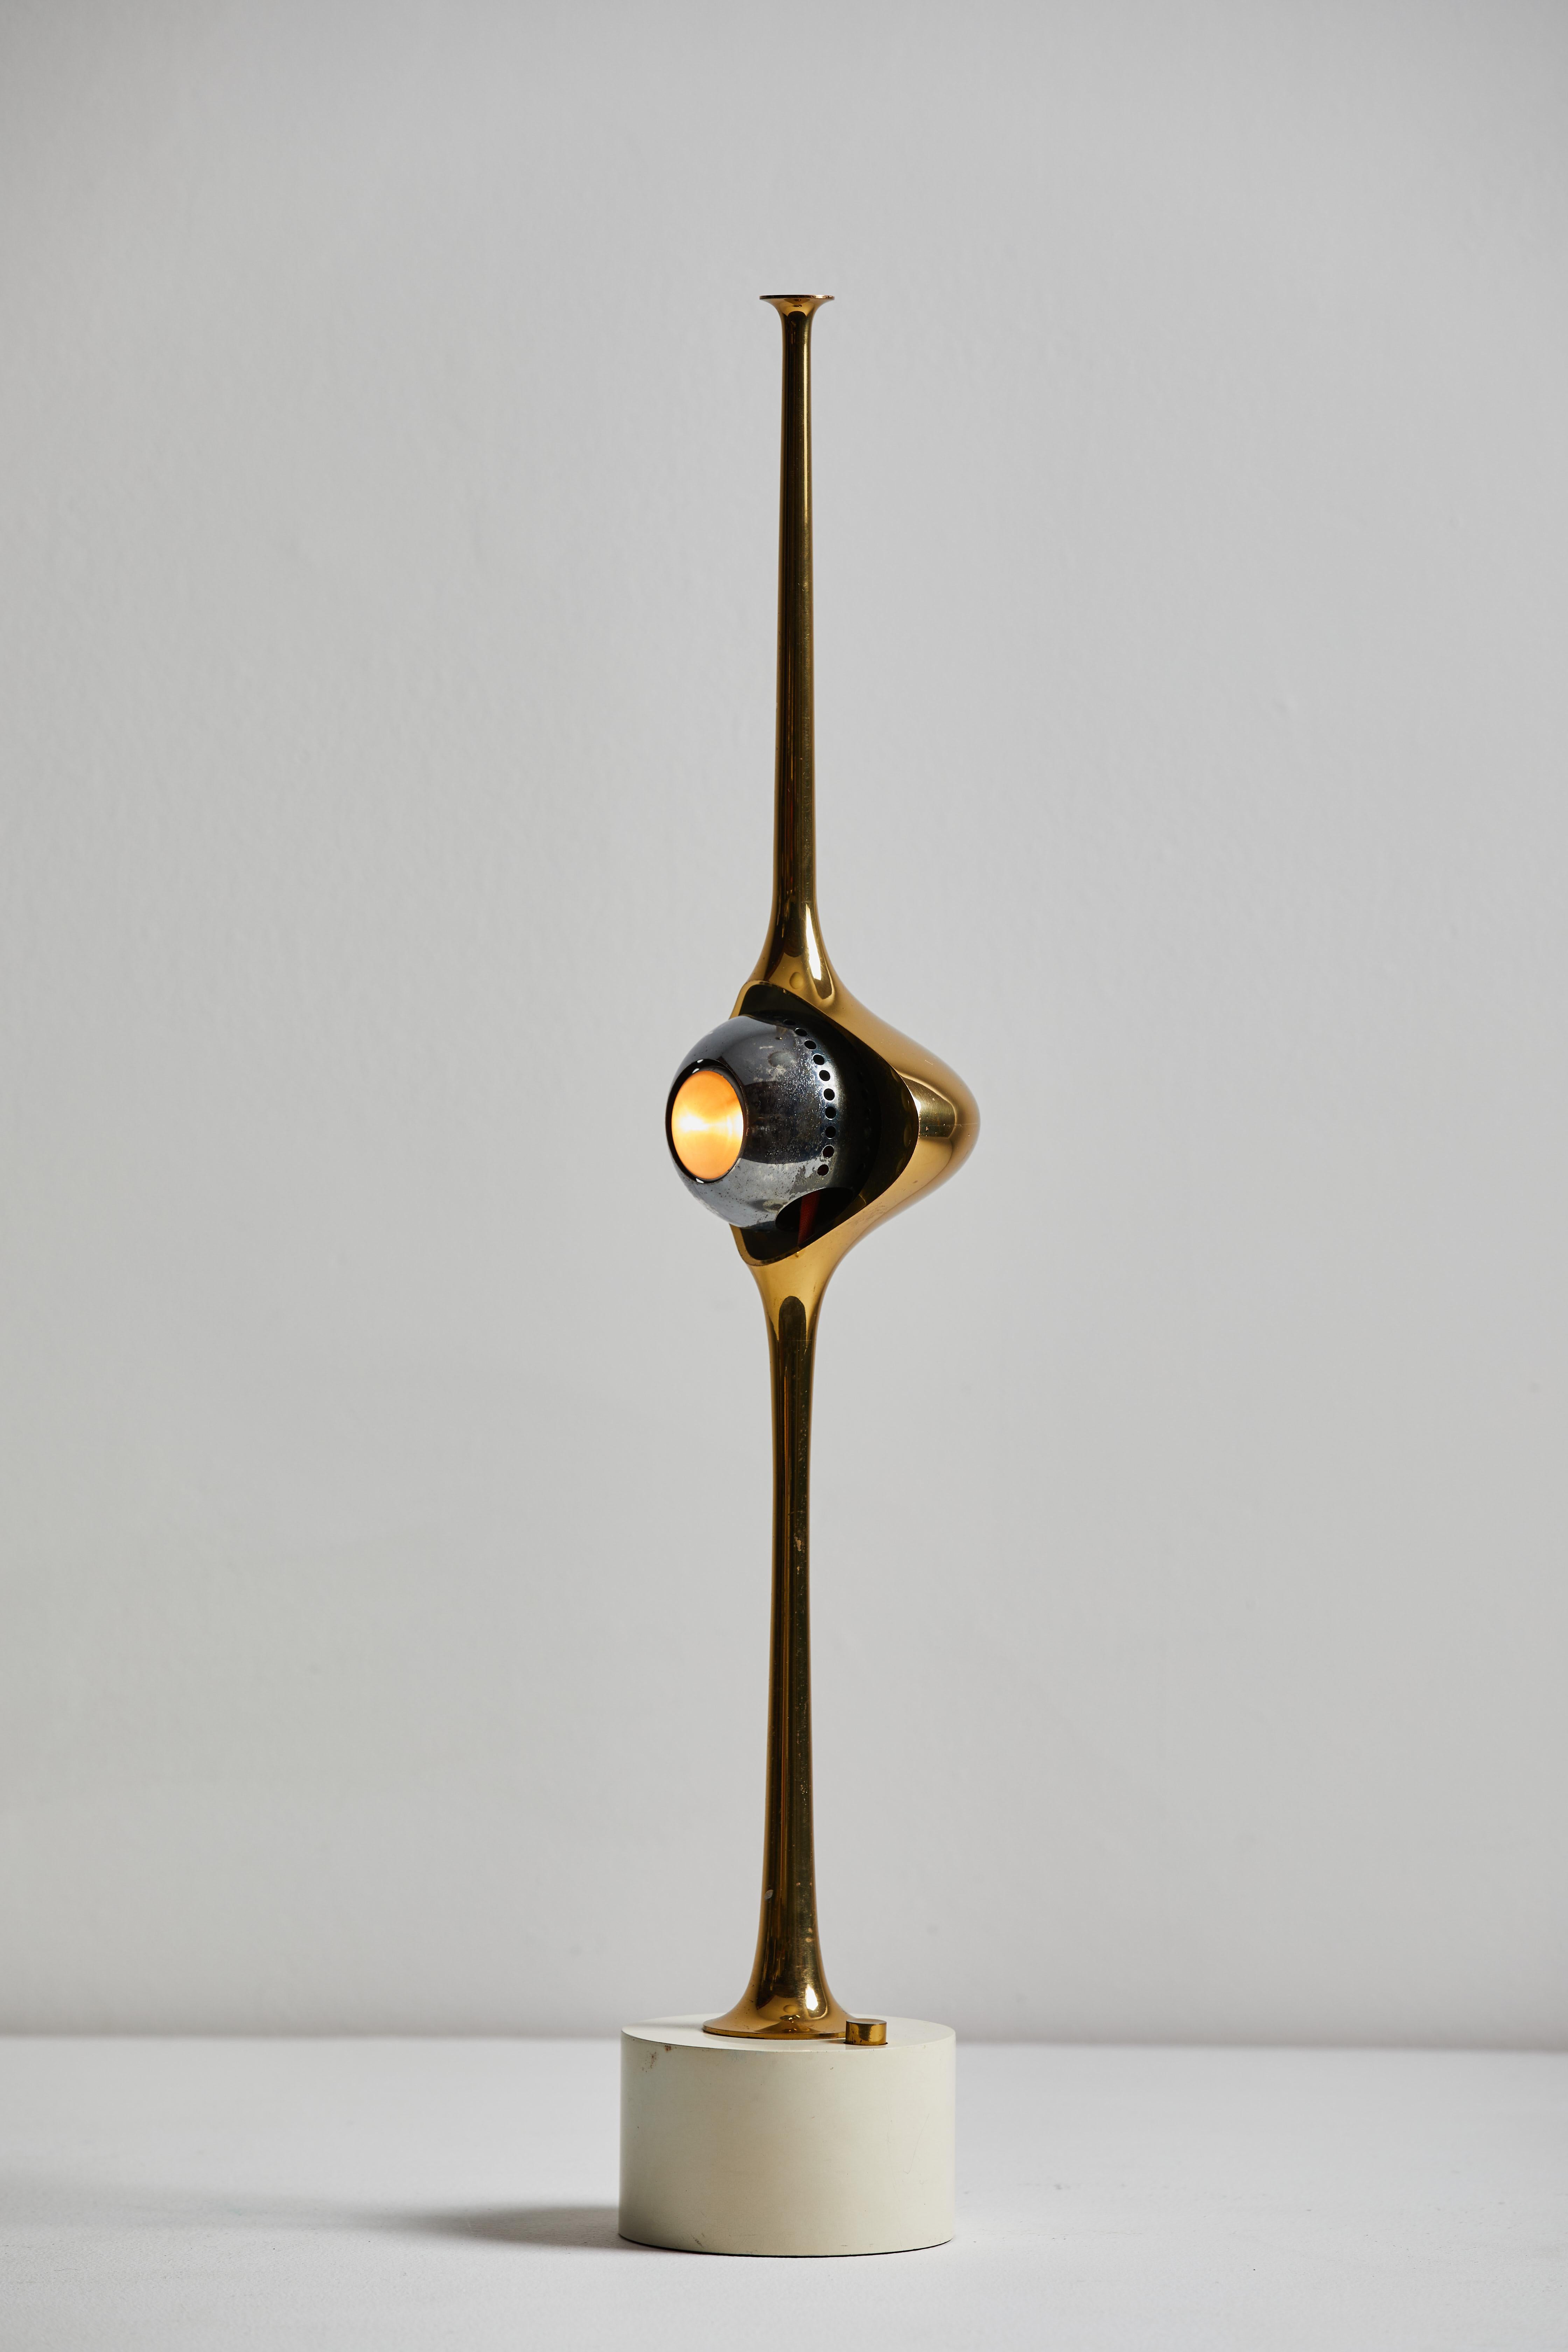 Cobra table lamp by Angelo Lelli for Arredoluce. Designed and manufactured in Italy, circa 1960s. Brass shade, encasing a magnetic, steel eyeball. Original cord. Takes one E27 European candelabra bulb. Bulb provided as a one time courtesy.